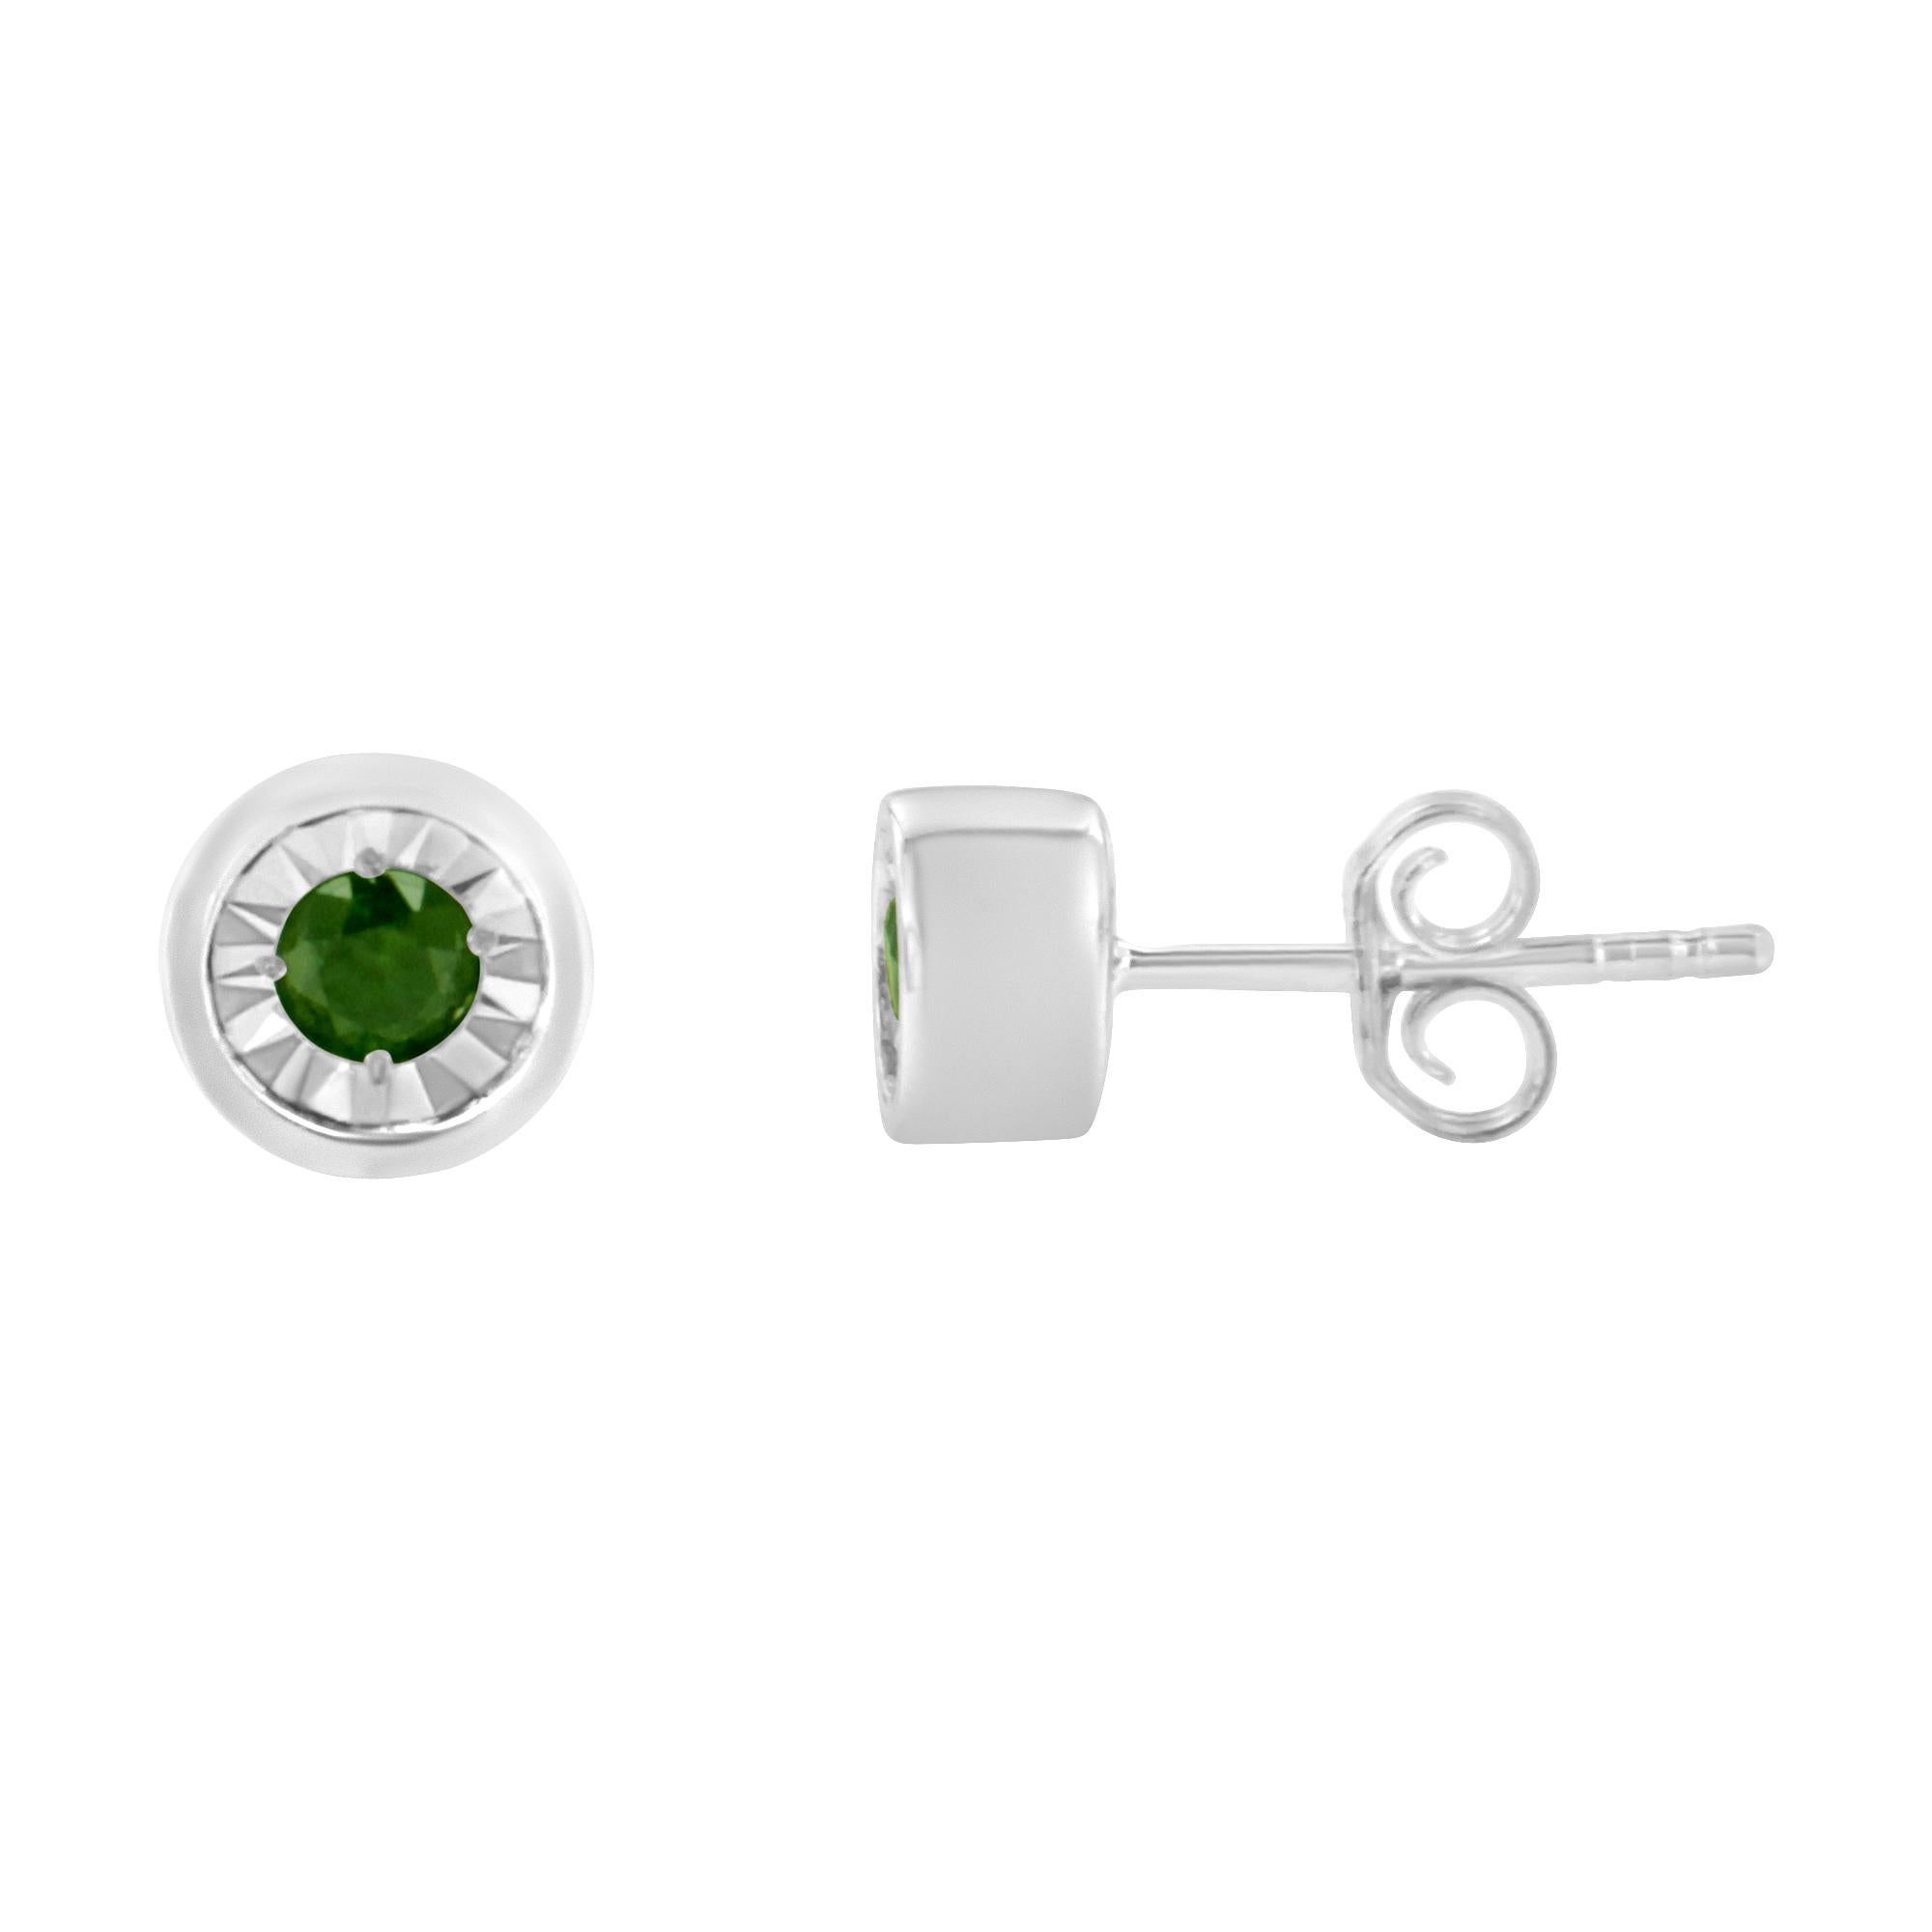 This delicate pair of diamond stud earrings feature color treated green diamonds. Crafted in a cool sterling silver making them the perfect choice to add a touch of color to everyday wear. The total diamond weight is .2 carats. 

'Video Available